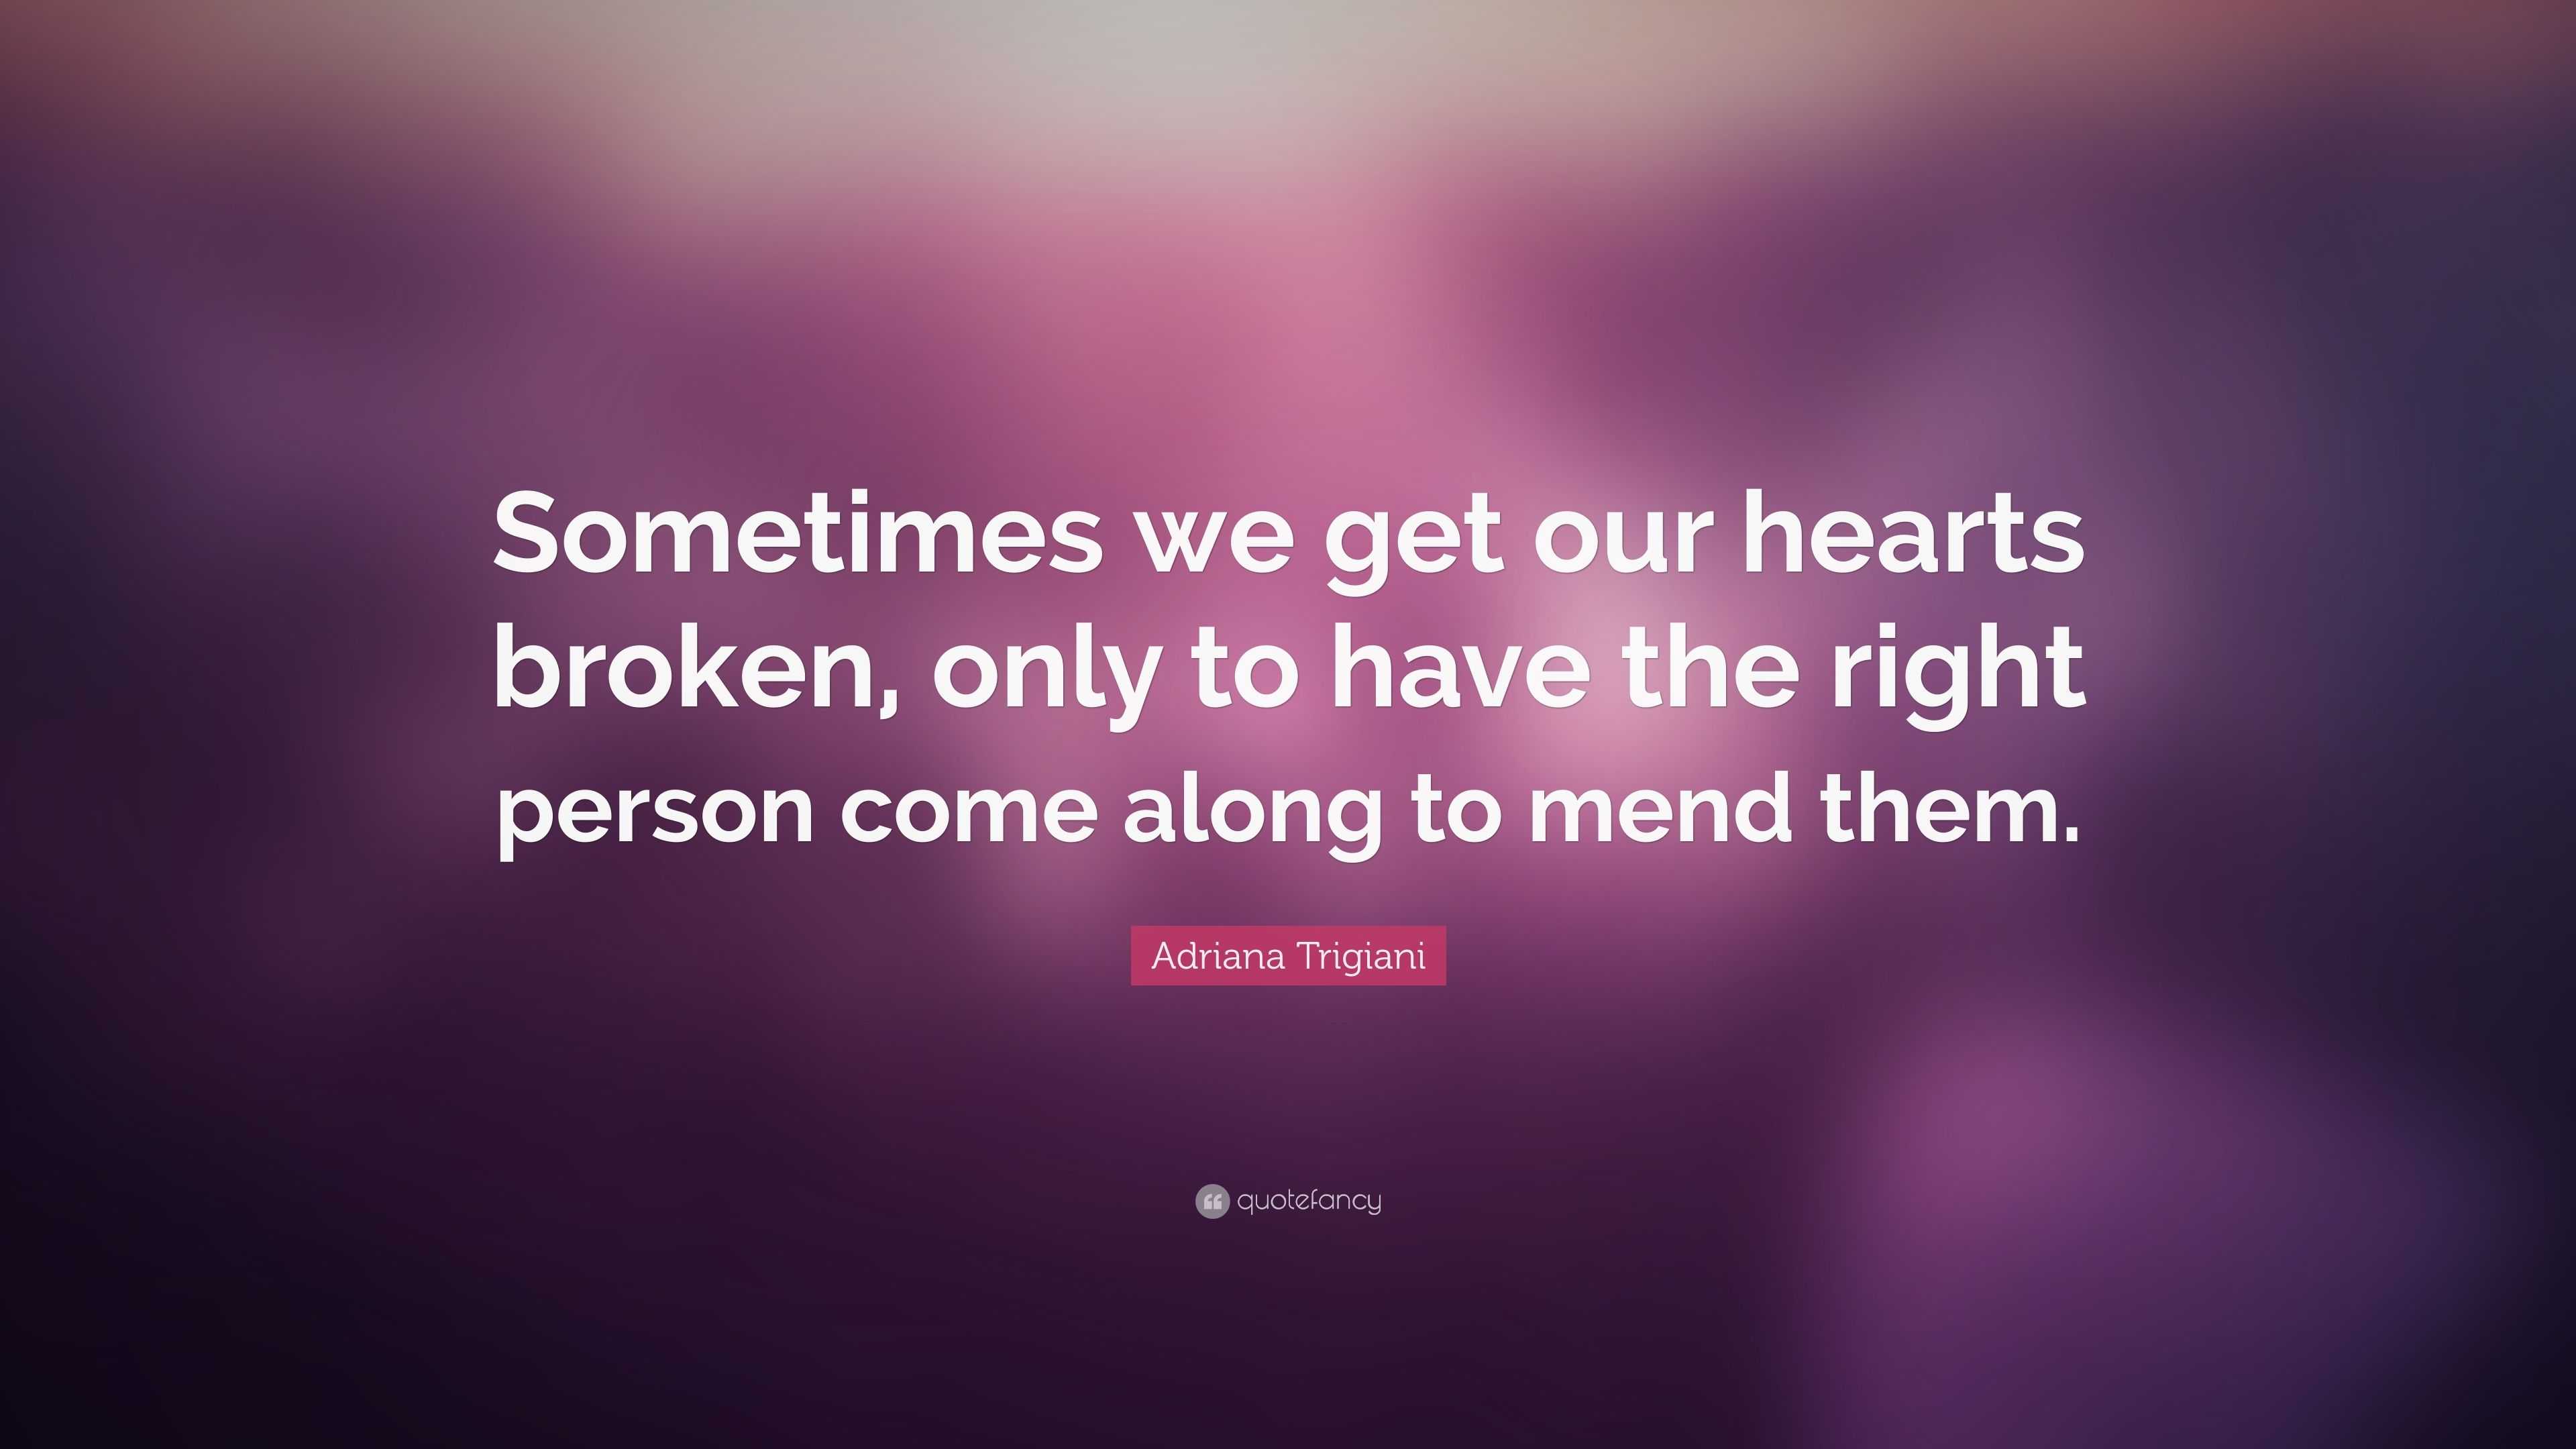 Adriana Trigiani Quote: “Sometimes we get our hearts broken, only to ...